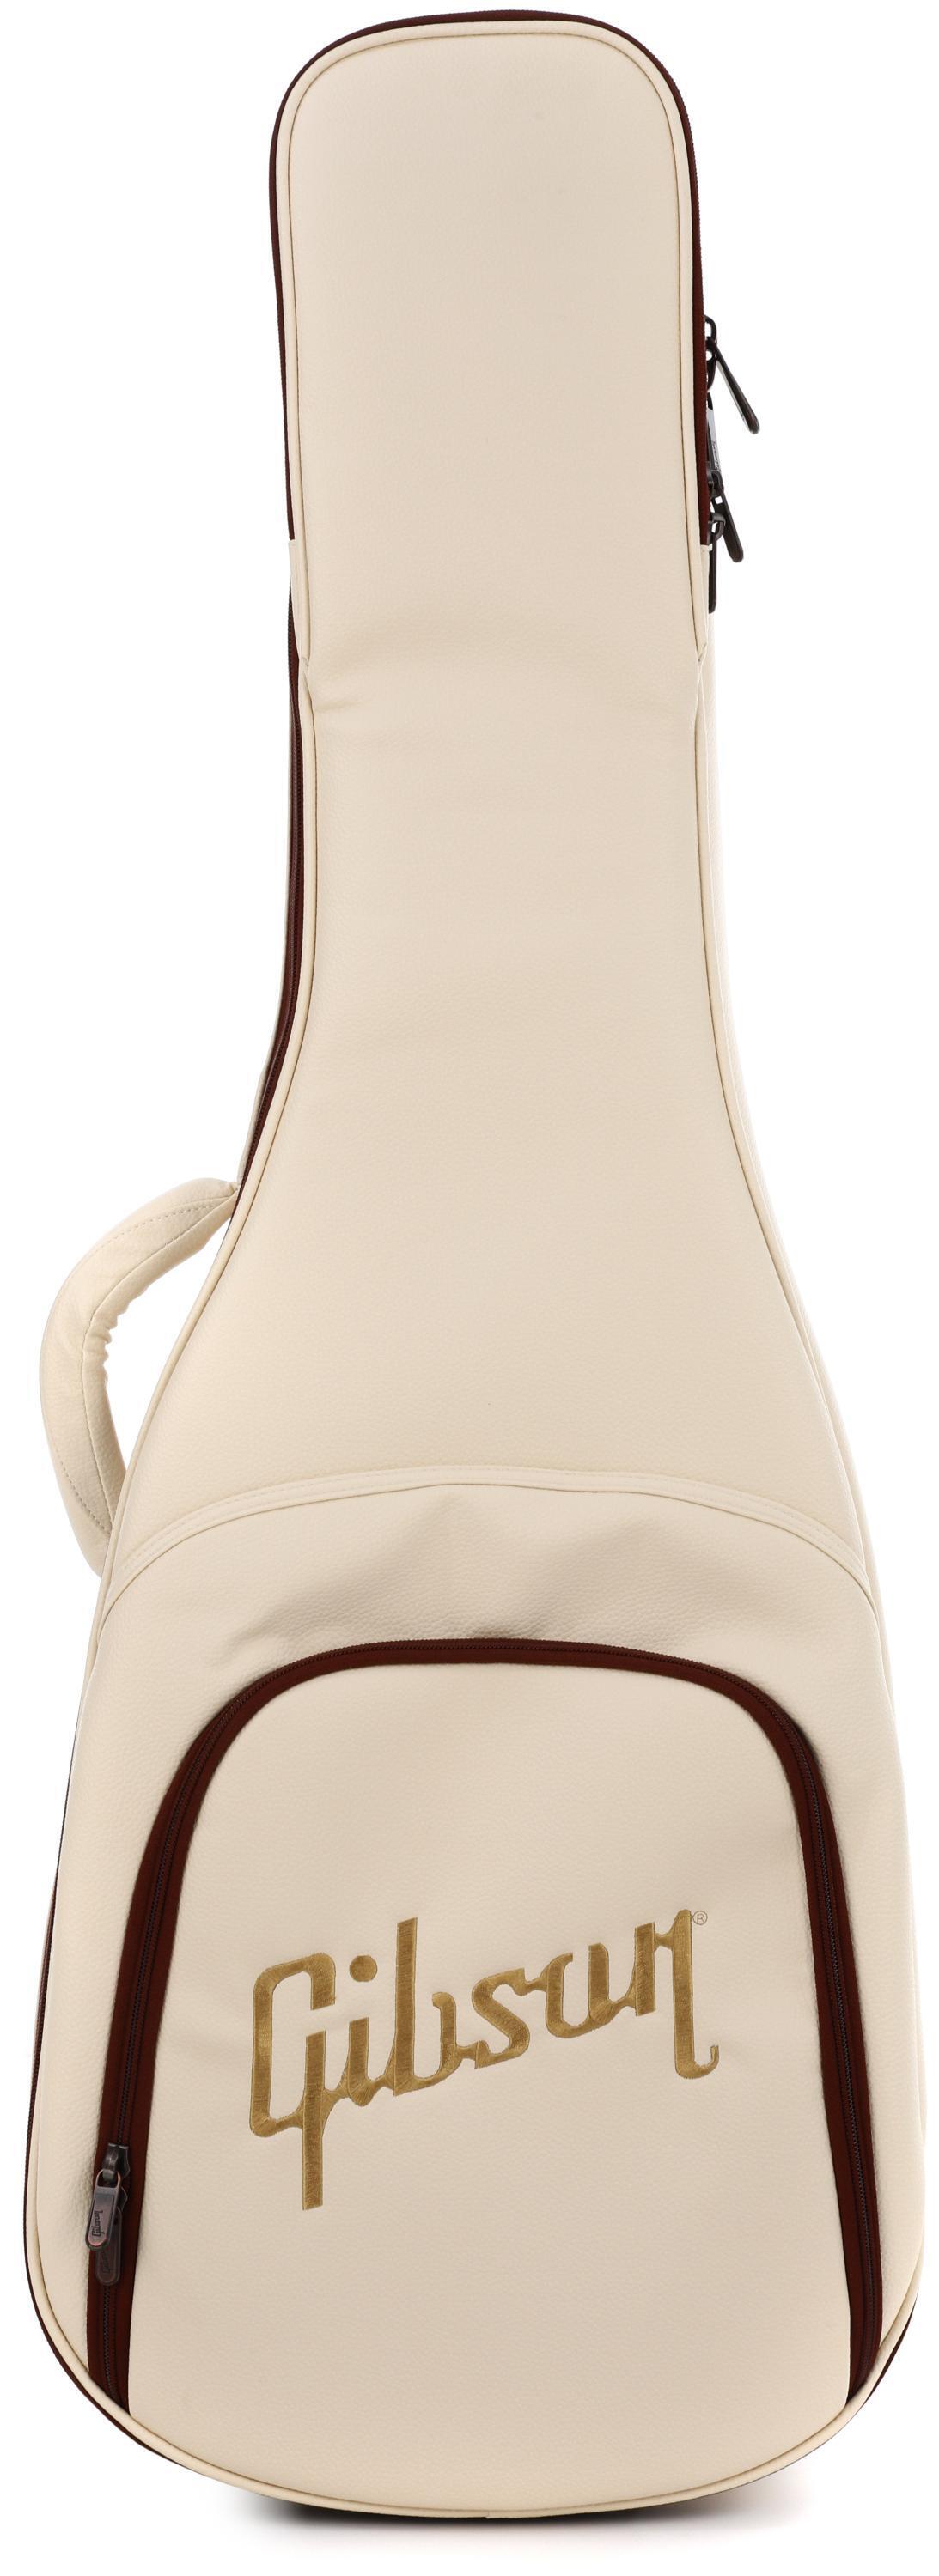 Gibson Accessories Premium Softcase Cream Sweetwater